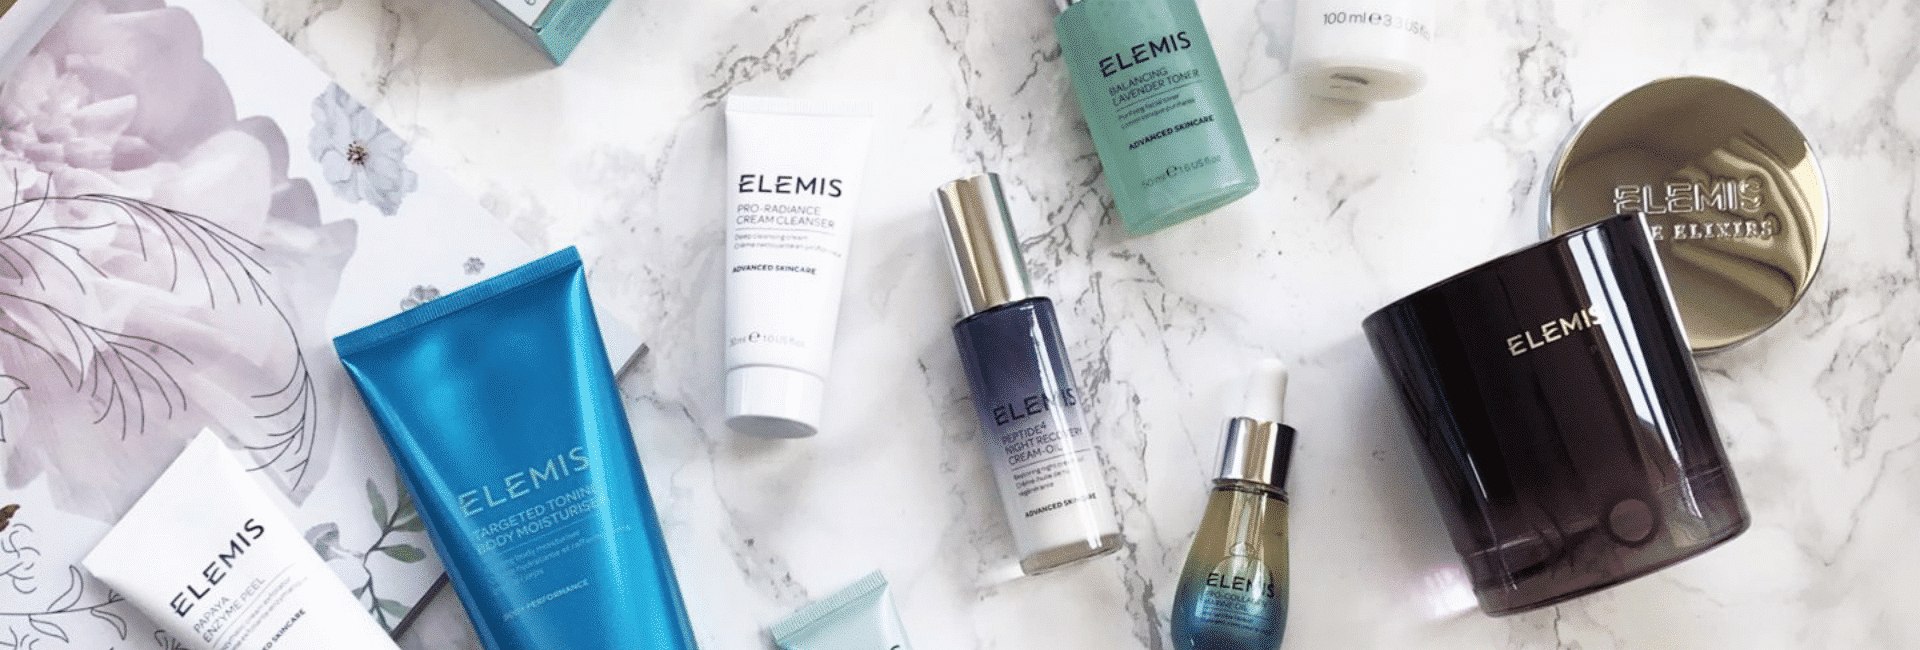 Picture of Elemis skincare products